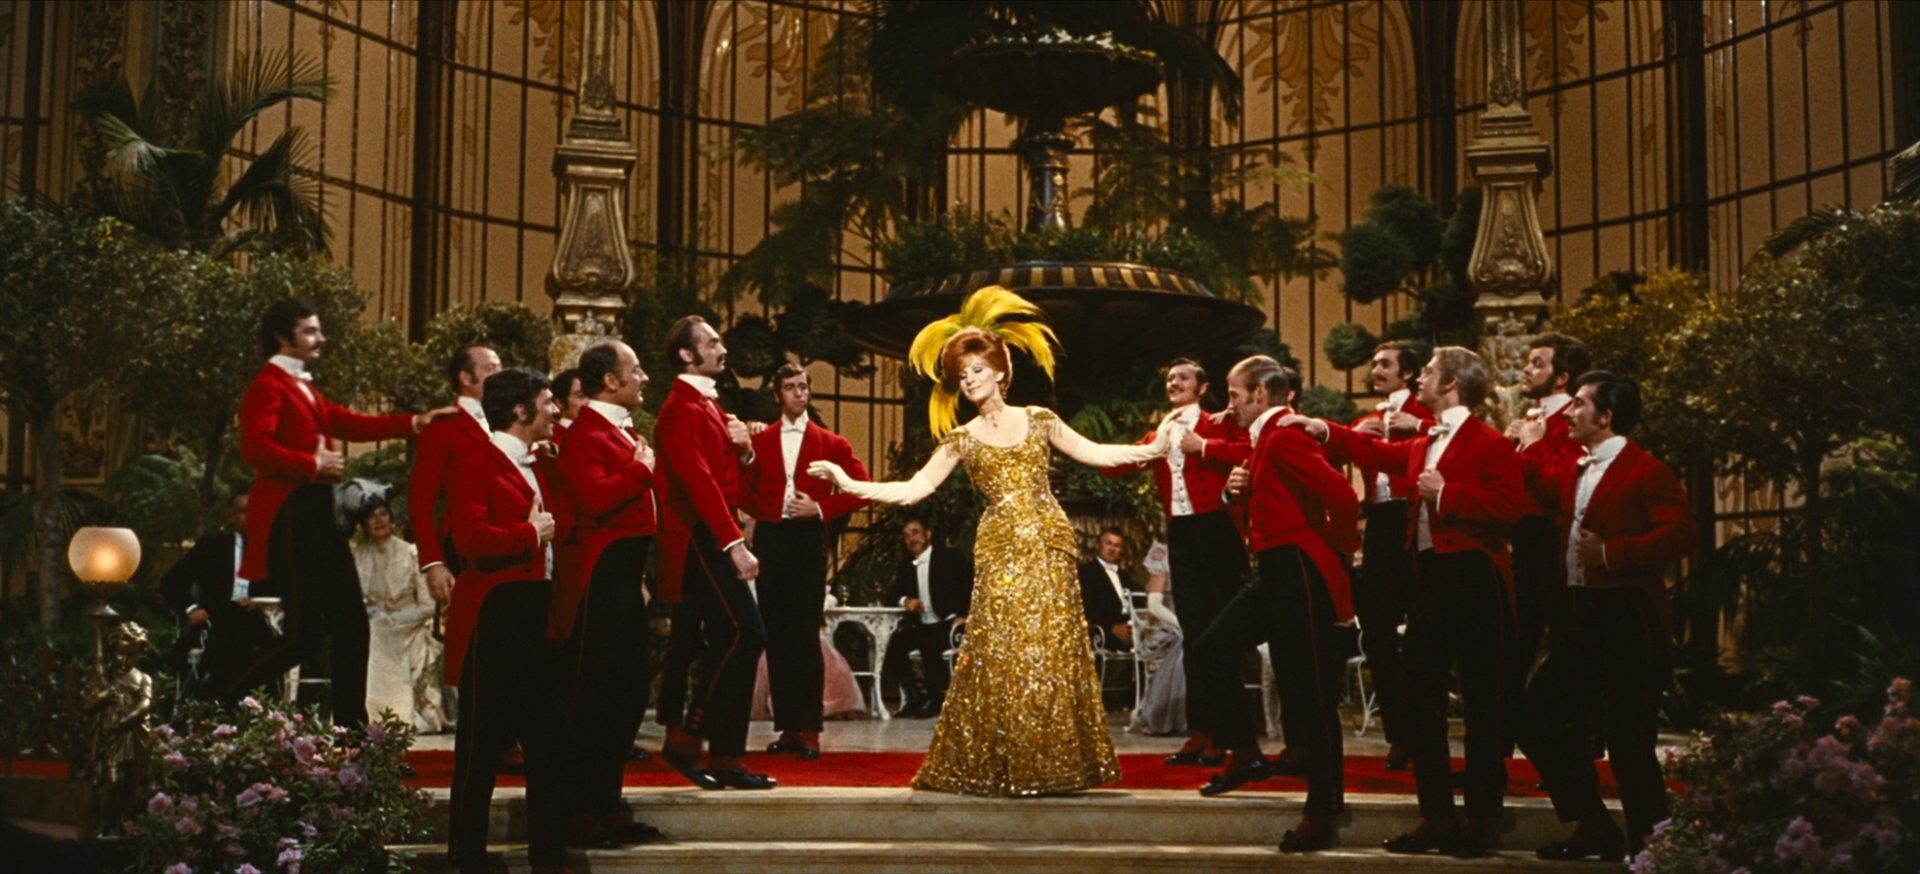 Barbra as Dolly sings the movie's title song.